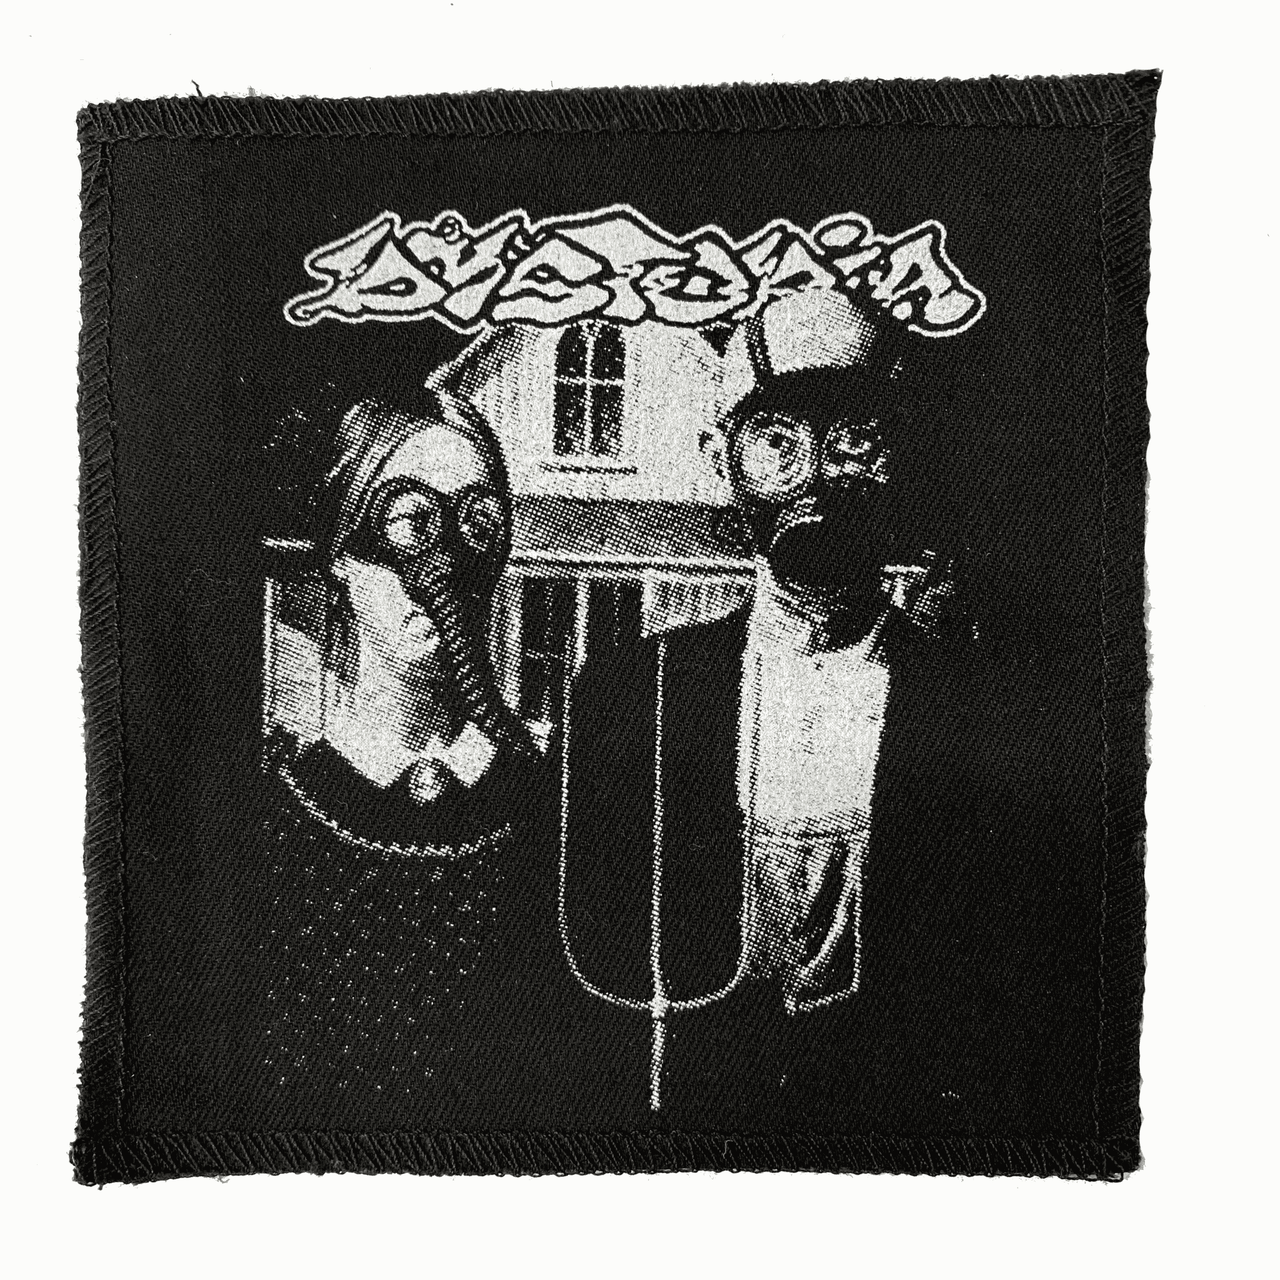 Dystopia American Gothic Cloth Patch